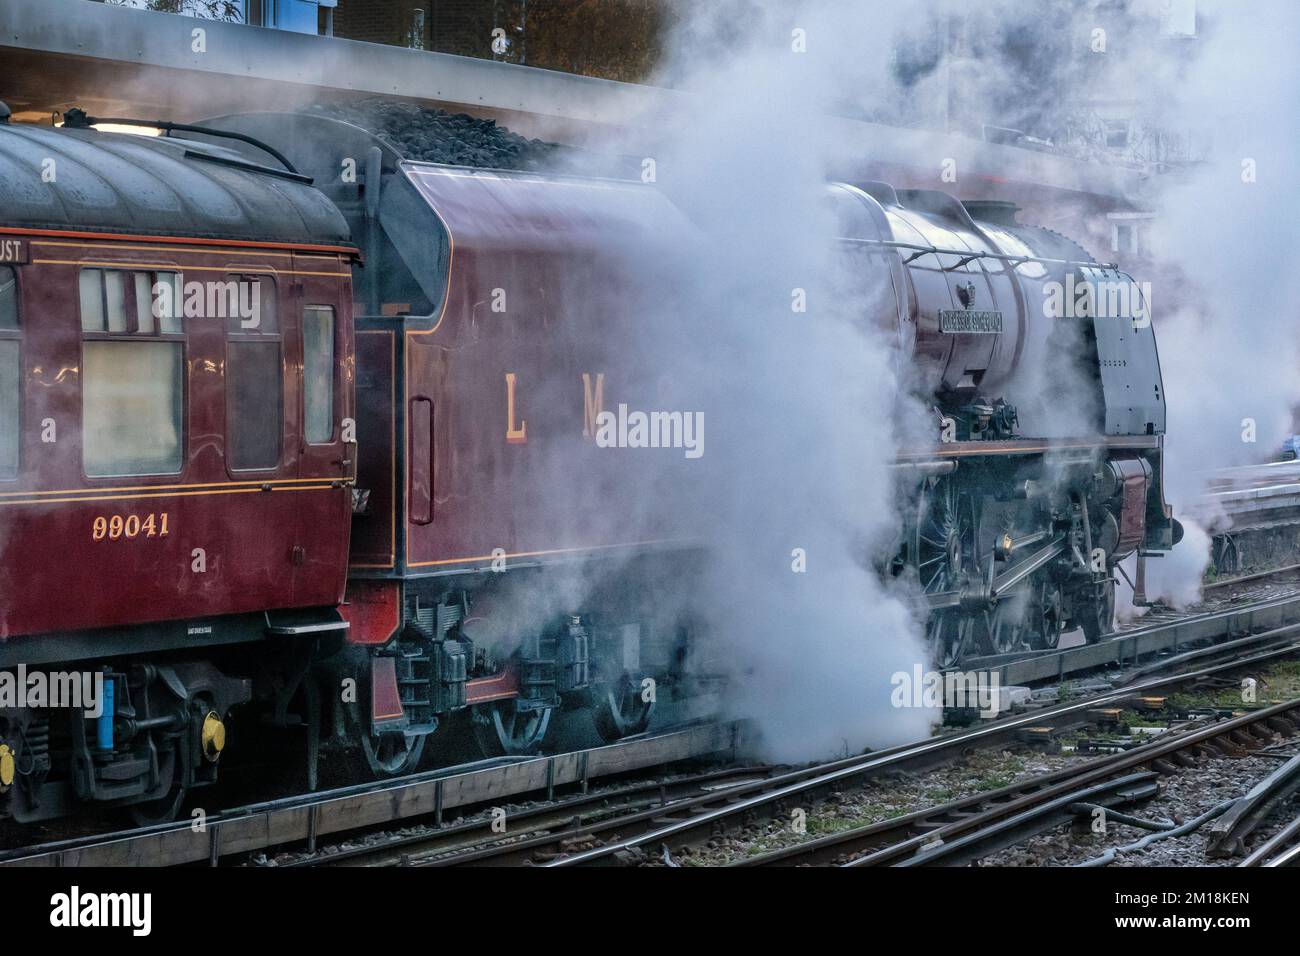 Railway Touring Company's Bath & Bristol Christmas Market express, at Victoria Station London.Pulled by Duchess of Sutherland LMS steam locomotive Stock Photo